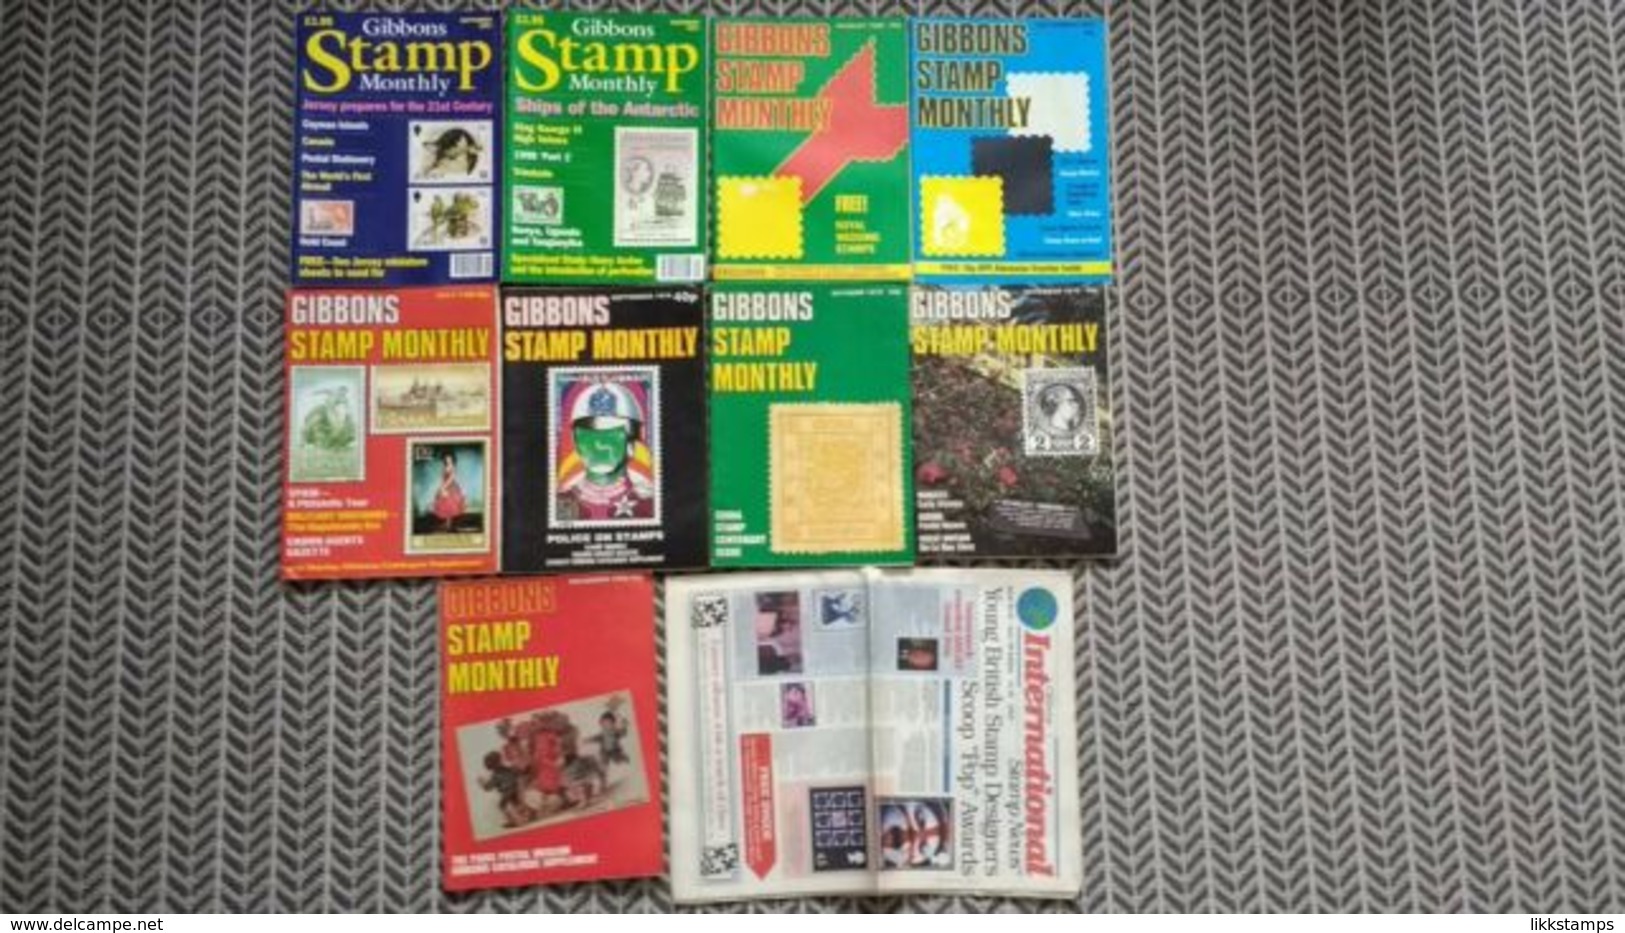 GIBBONS STAMP MONTHLY 1978/1980/1981/1997 VARIOUS ISSUES + 1 STAMP NEWS #L0009 (B6) - Anglais (àpd. 1941)